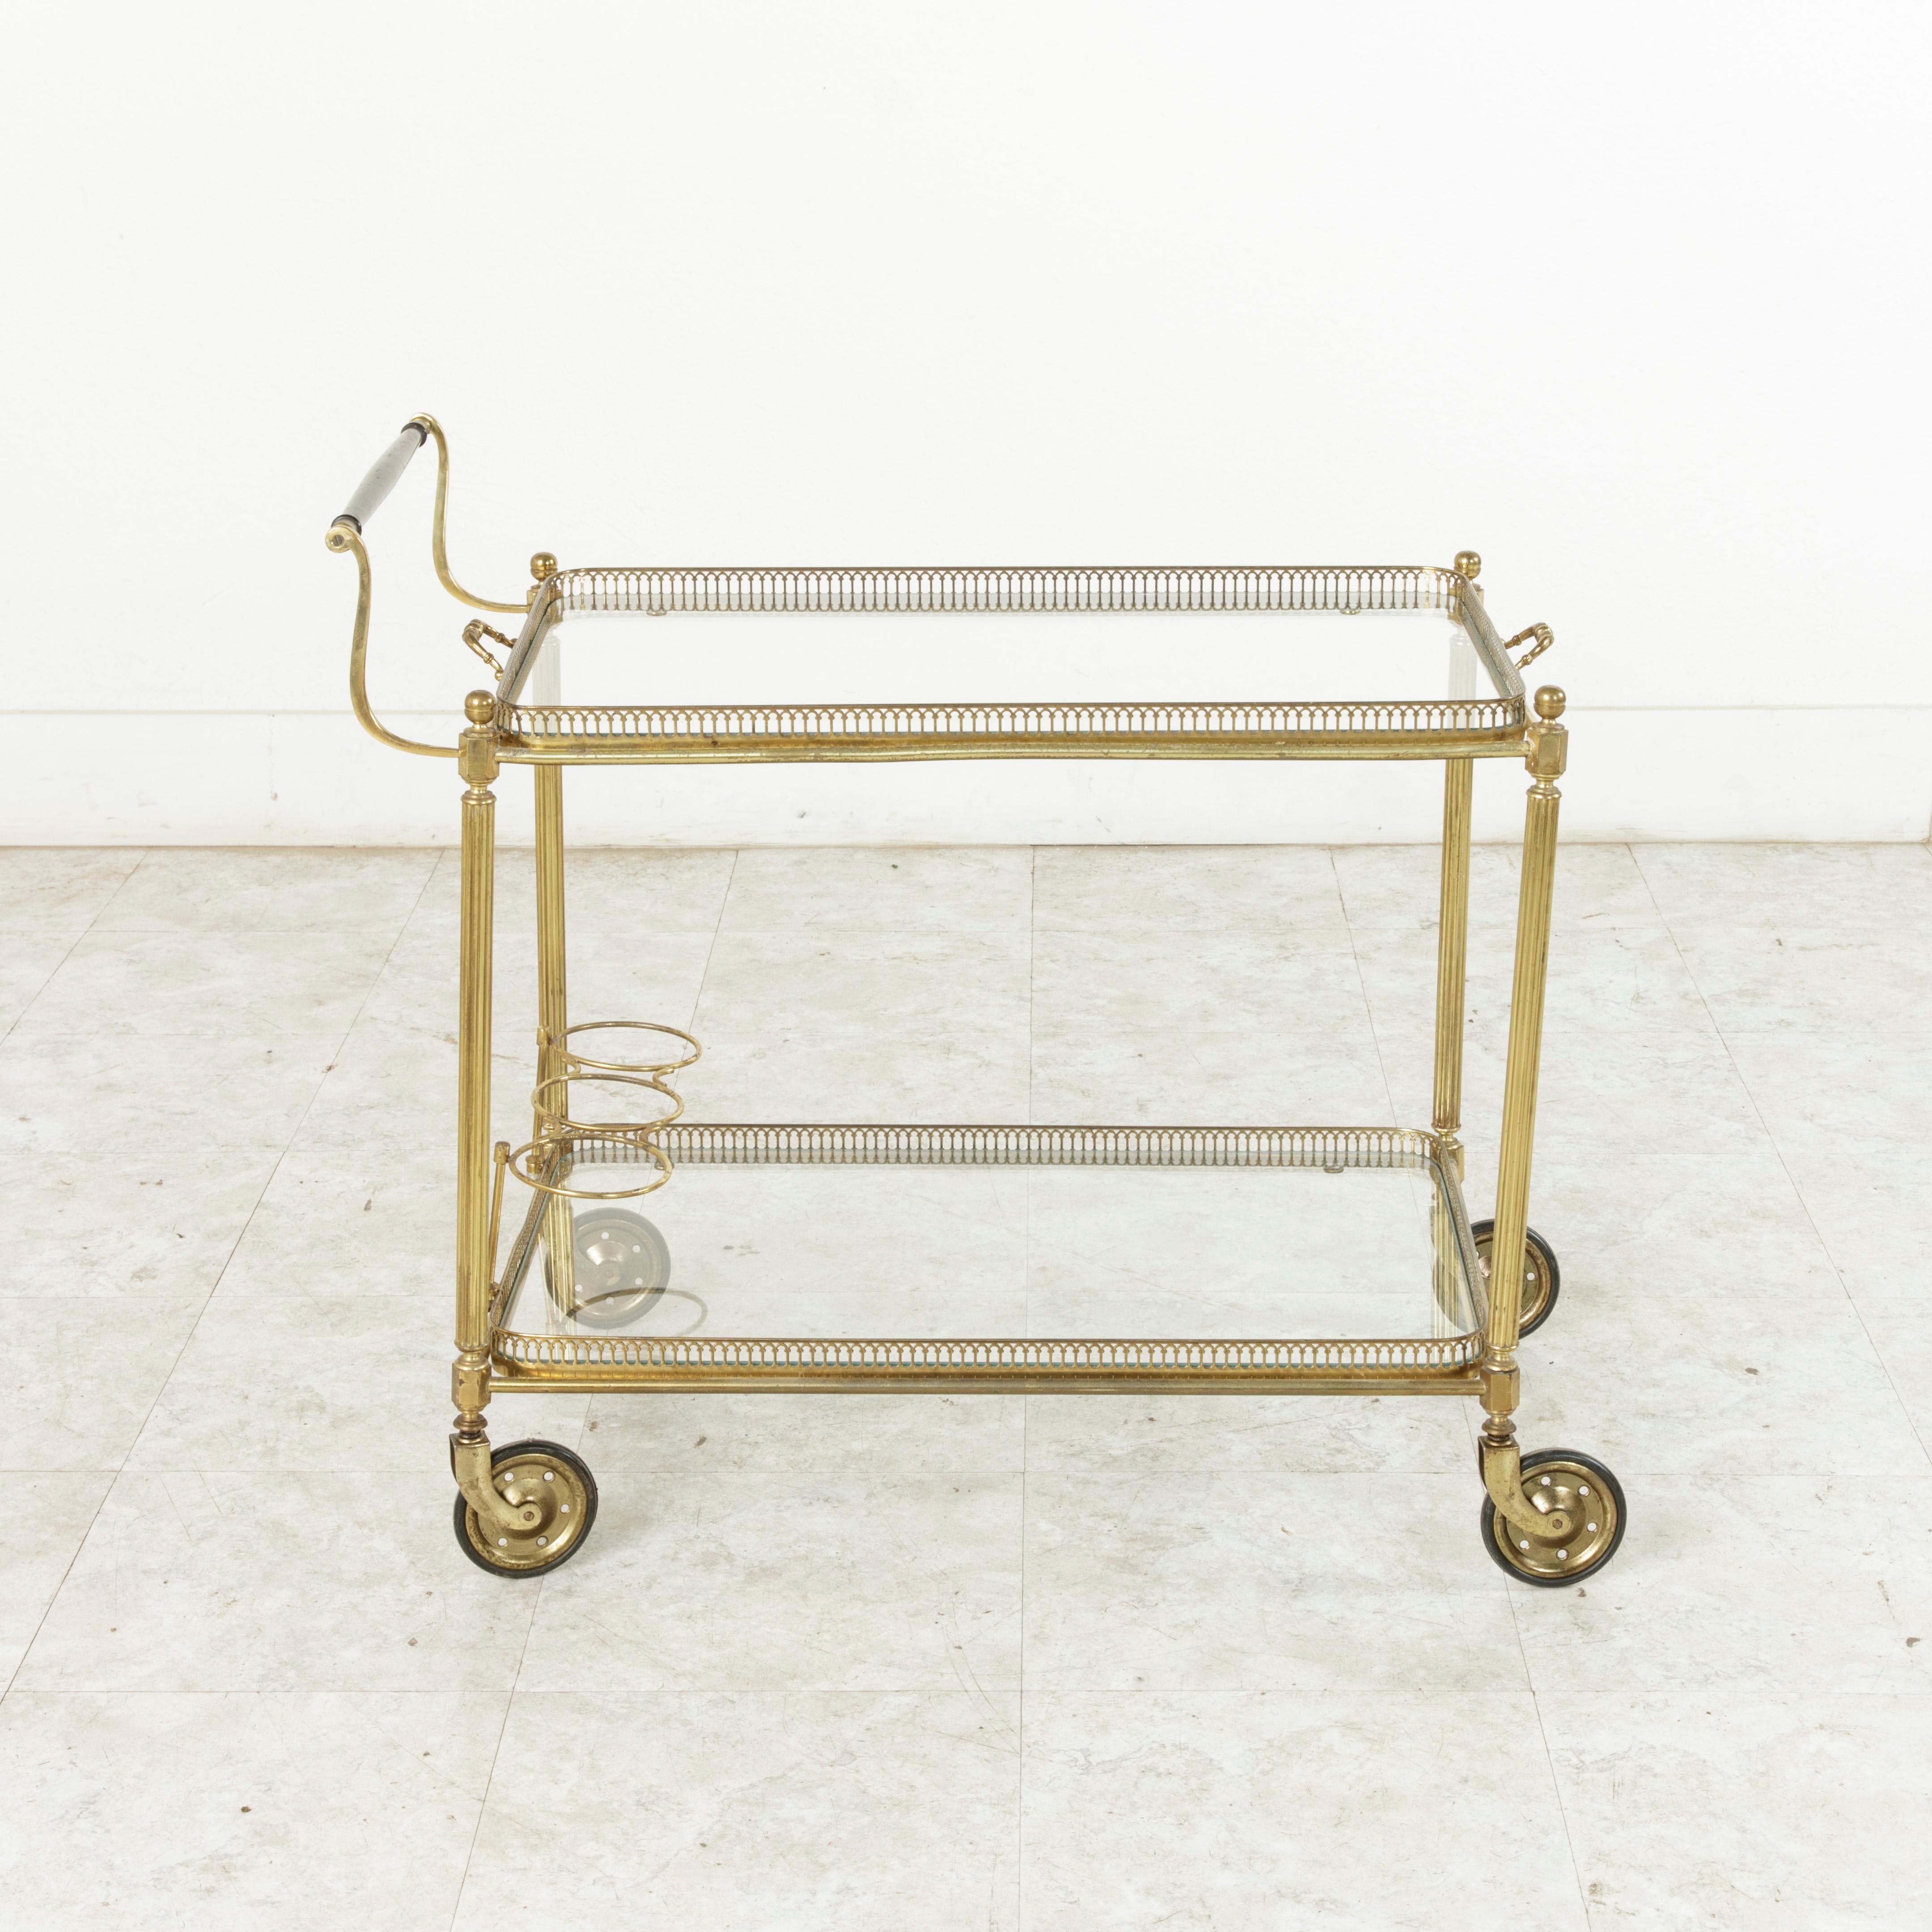 This midcentury French Louis XVI style brass bar cart features a mahogany wood handle and two glass shelves surrounded by pierced brass galleries. The upper shelf is removable and doubles as a serving tray with a handle on each side. The lower shelf